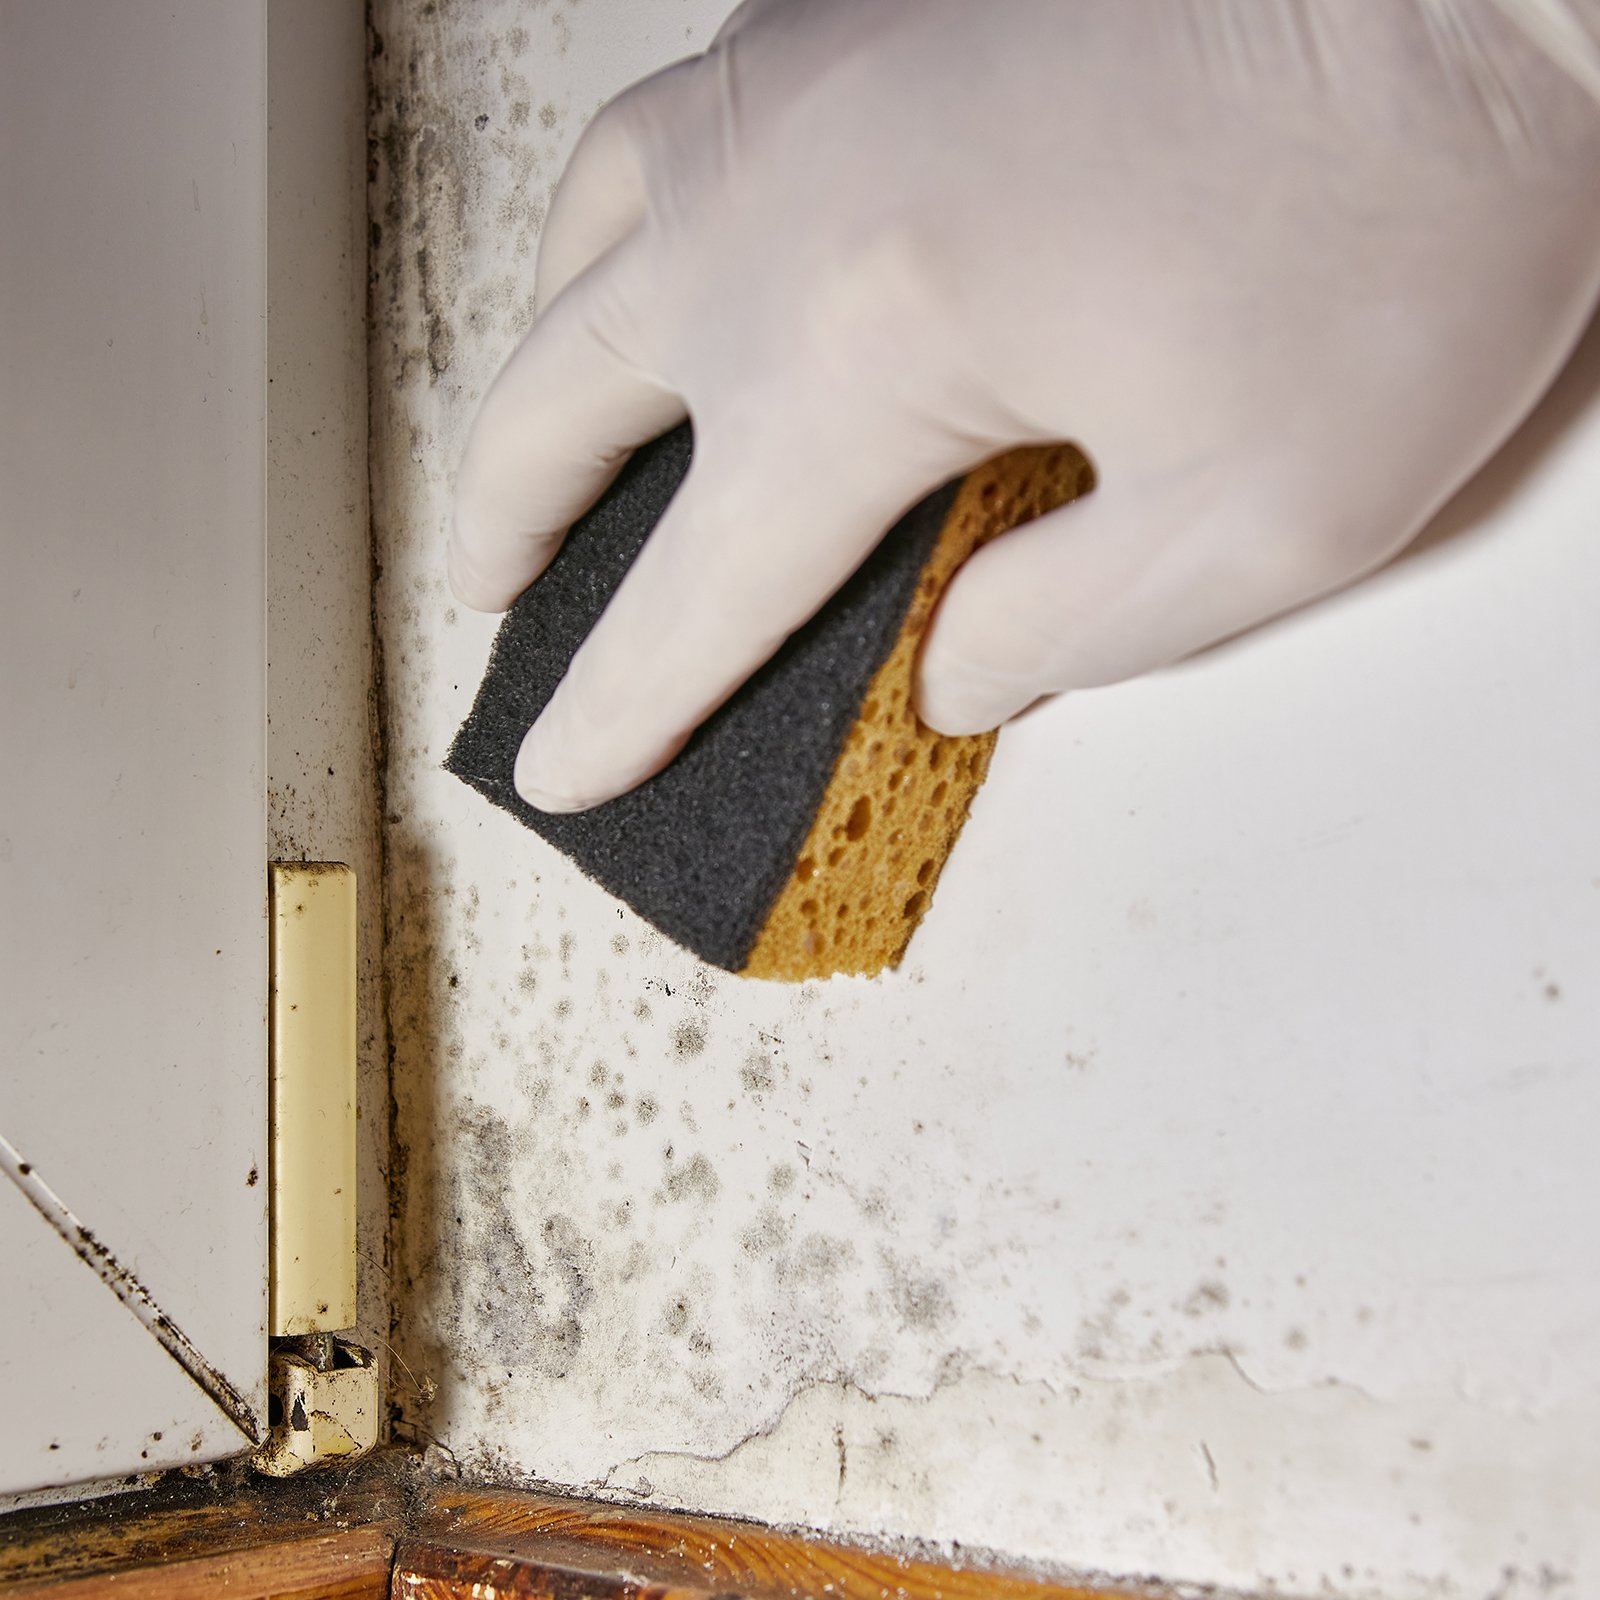 Quick action is required in the event of mould infestation